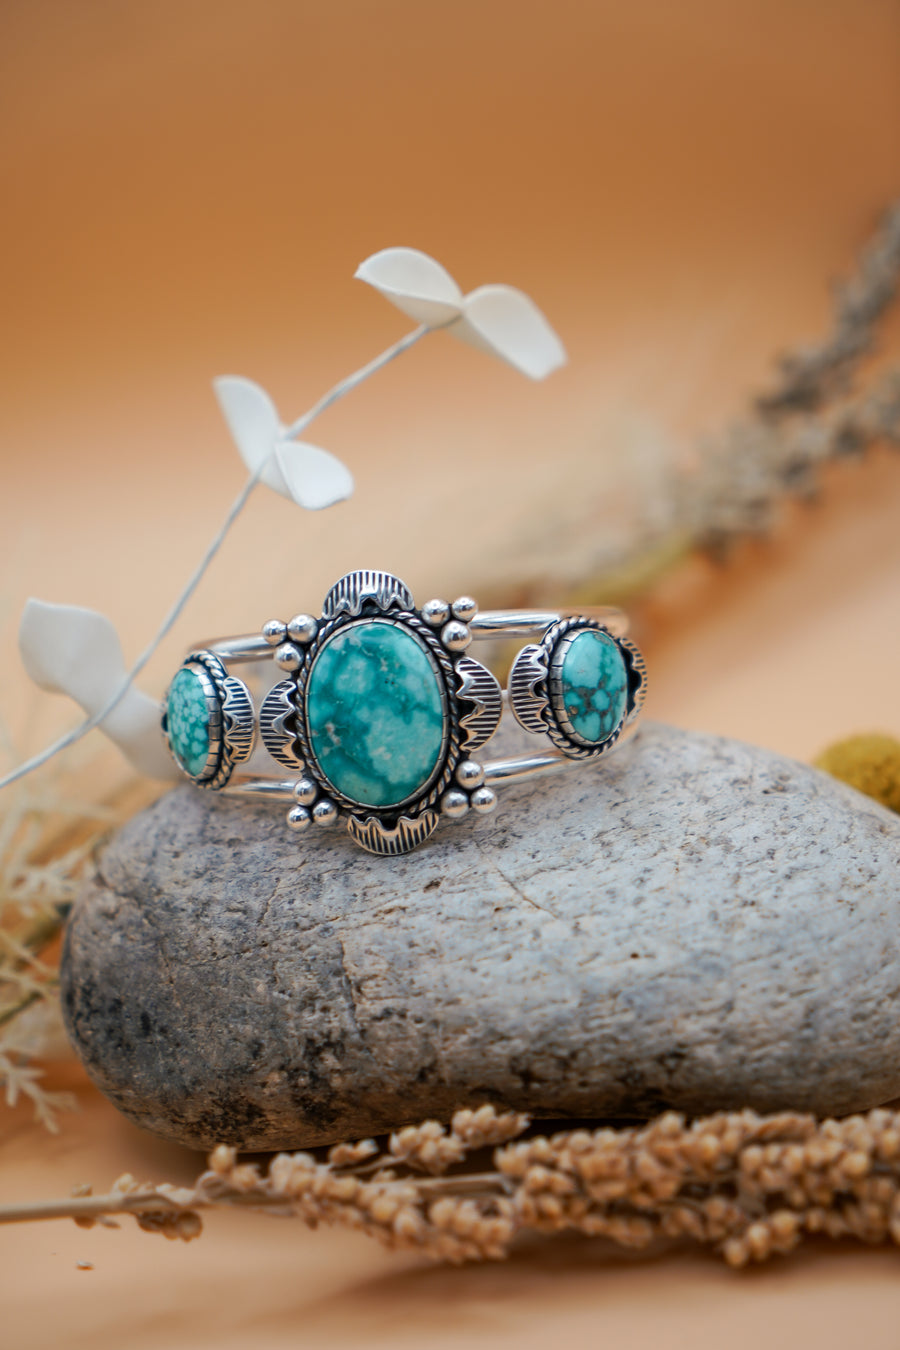 Statement Cuff in Whitewater Turquoise